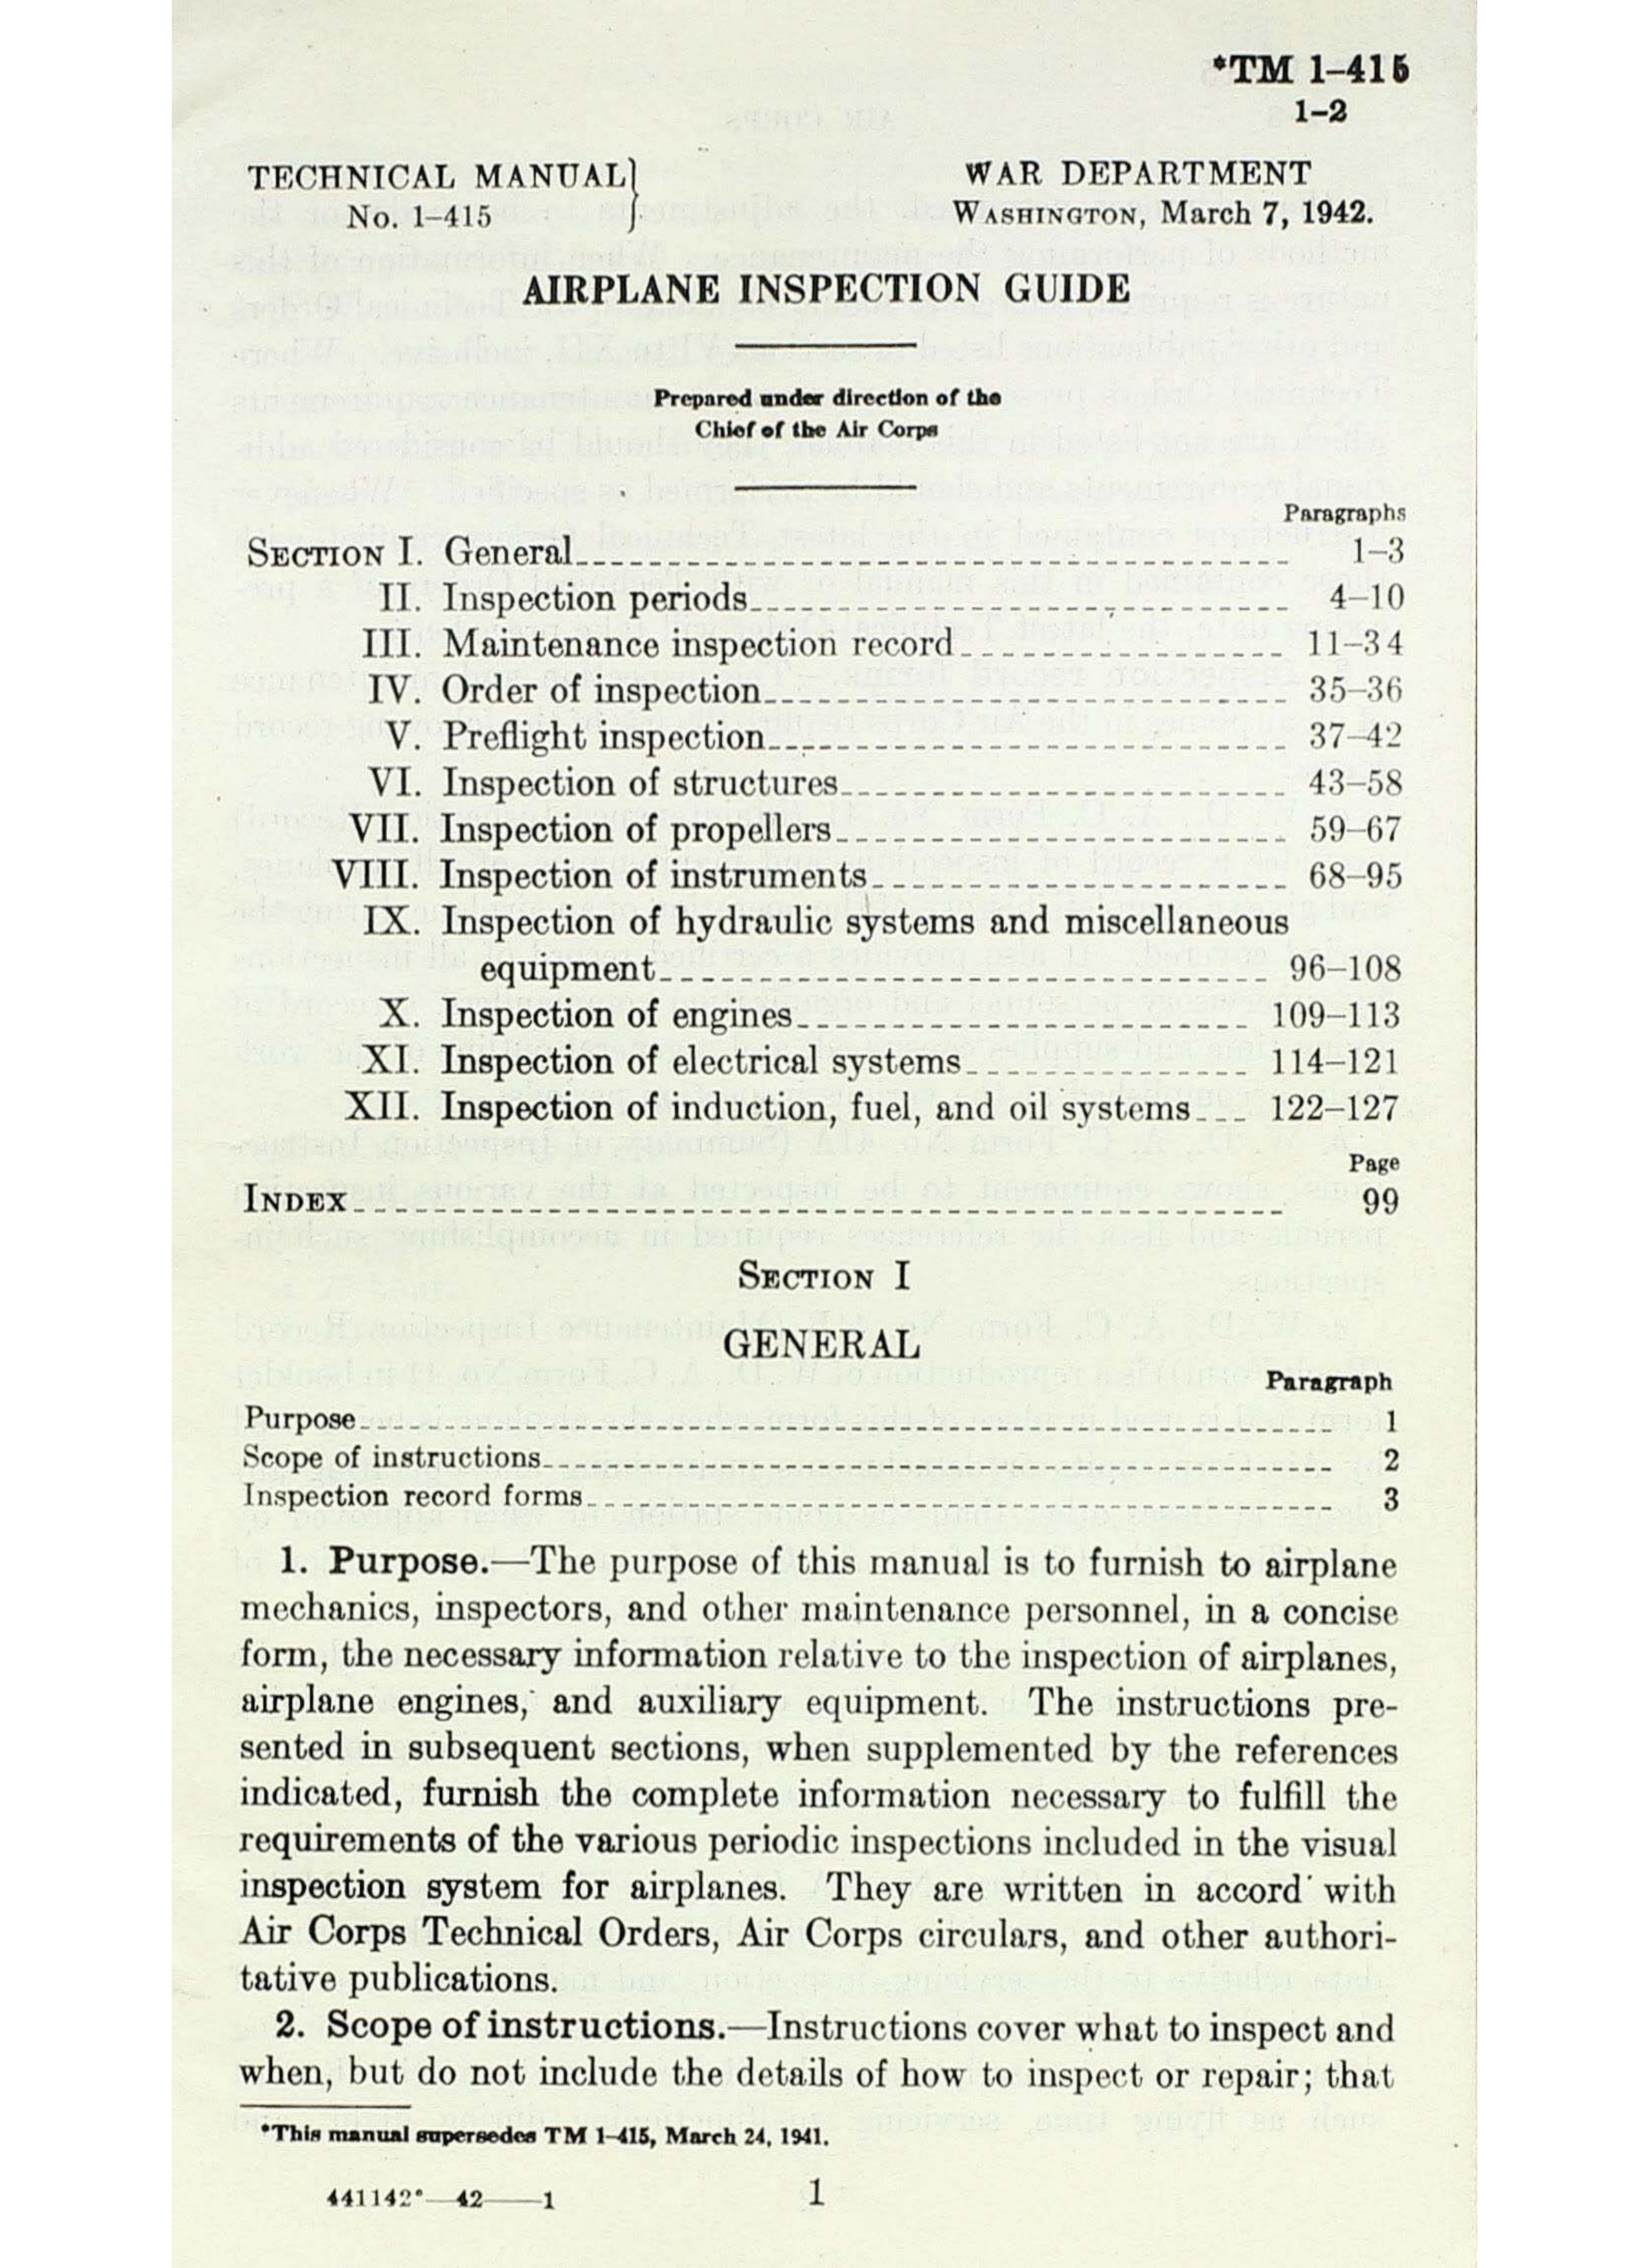 Sample page 2 from AirCorps Library document: Airplane Inspection Guide - War Department Tech Manual 